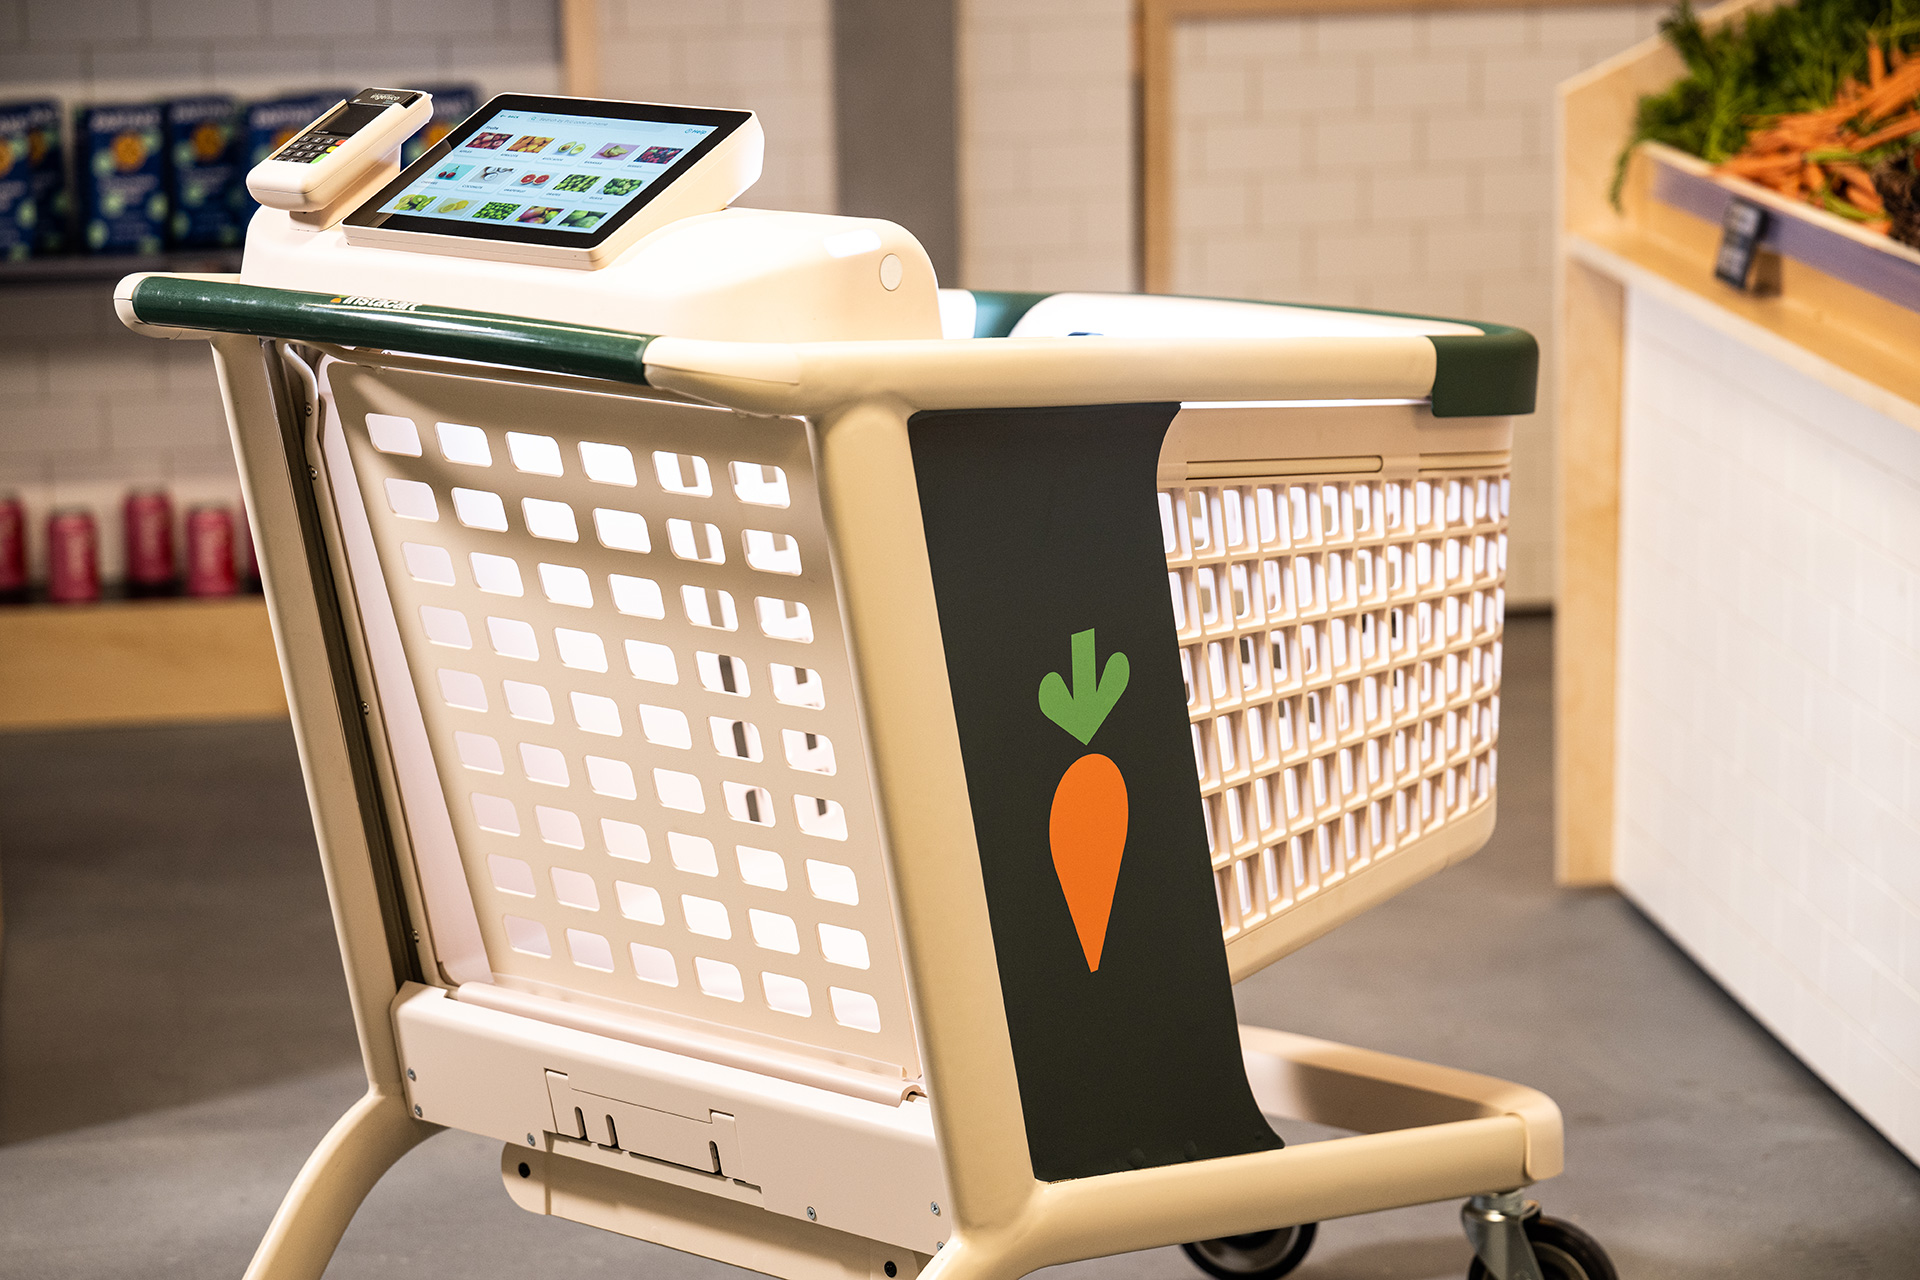 Instacart teams with retailers to create grocery stores powered by its tech